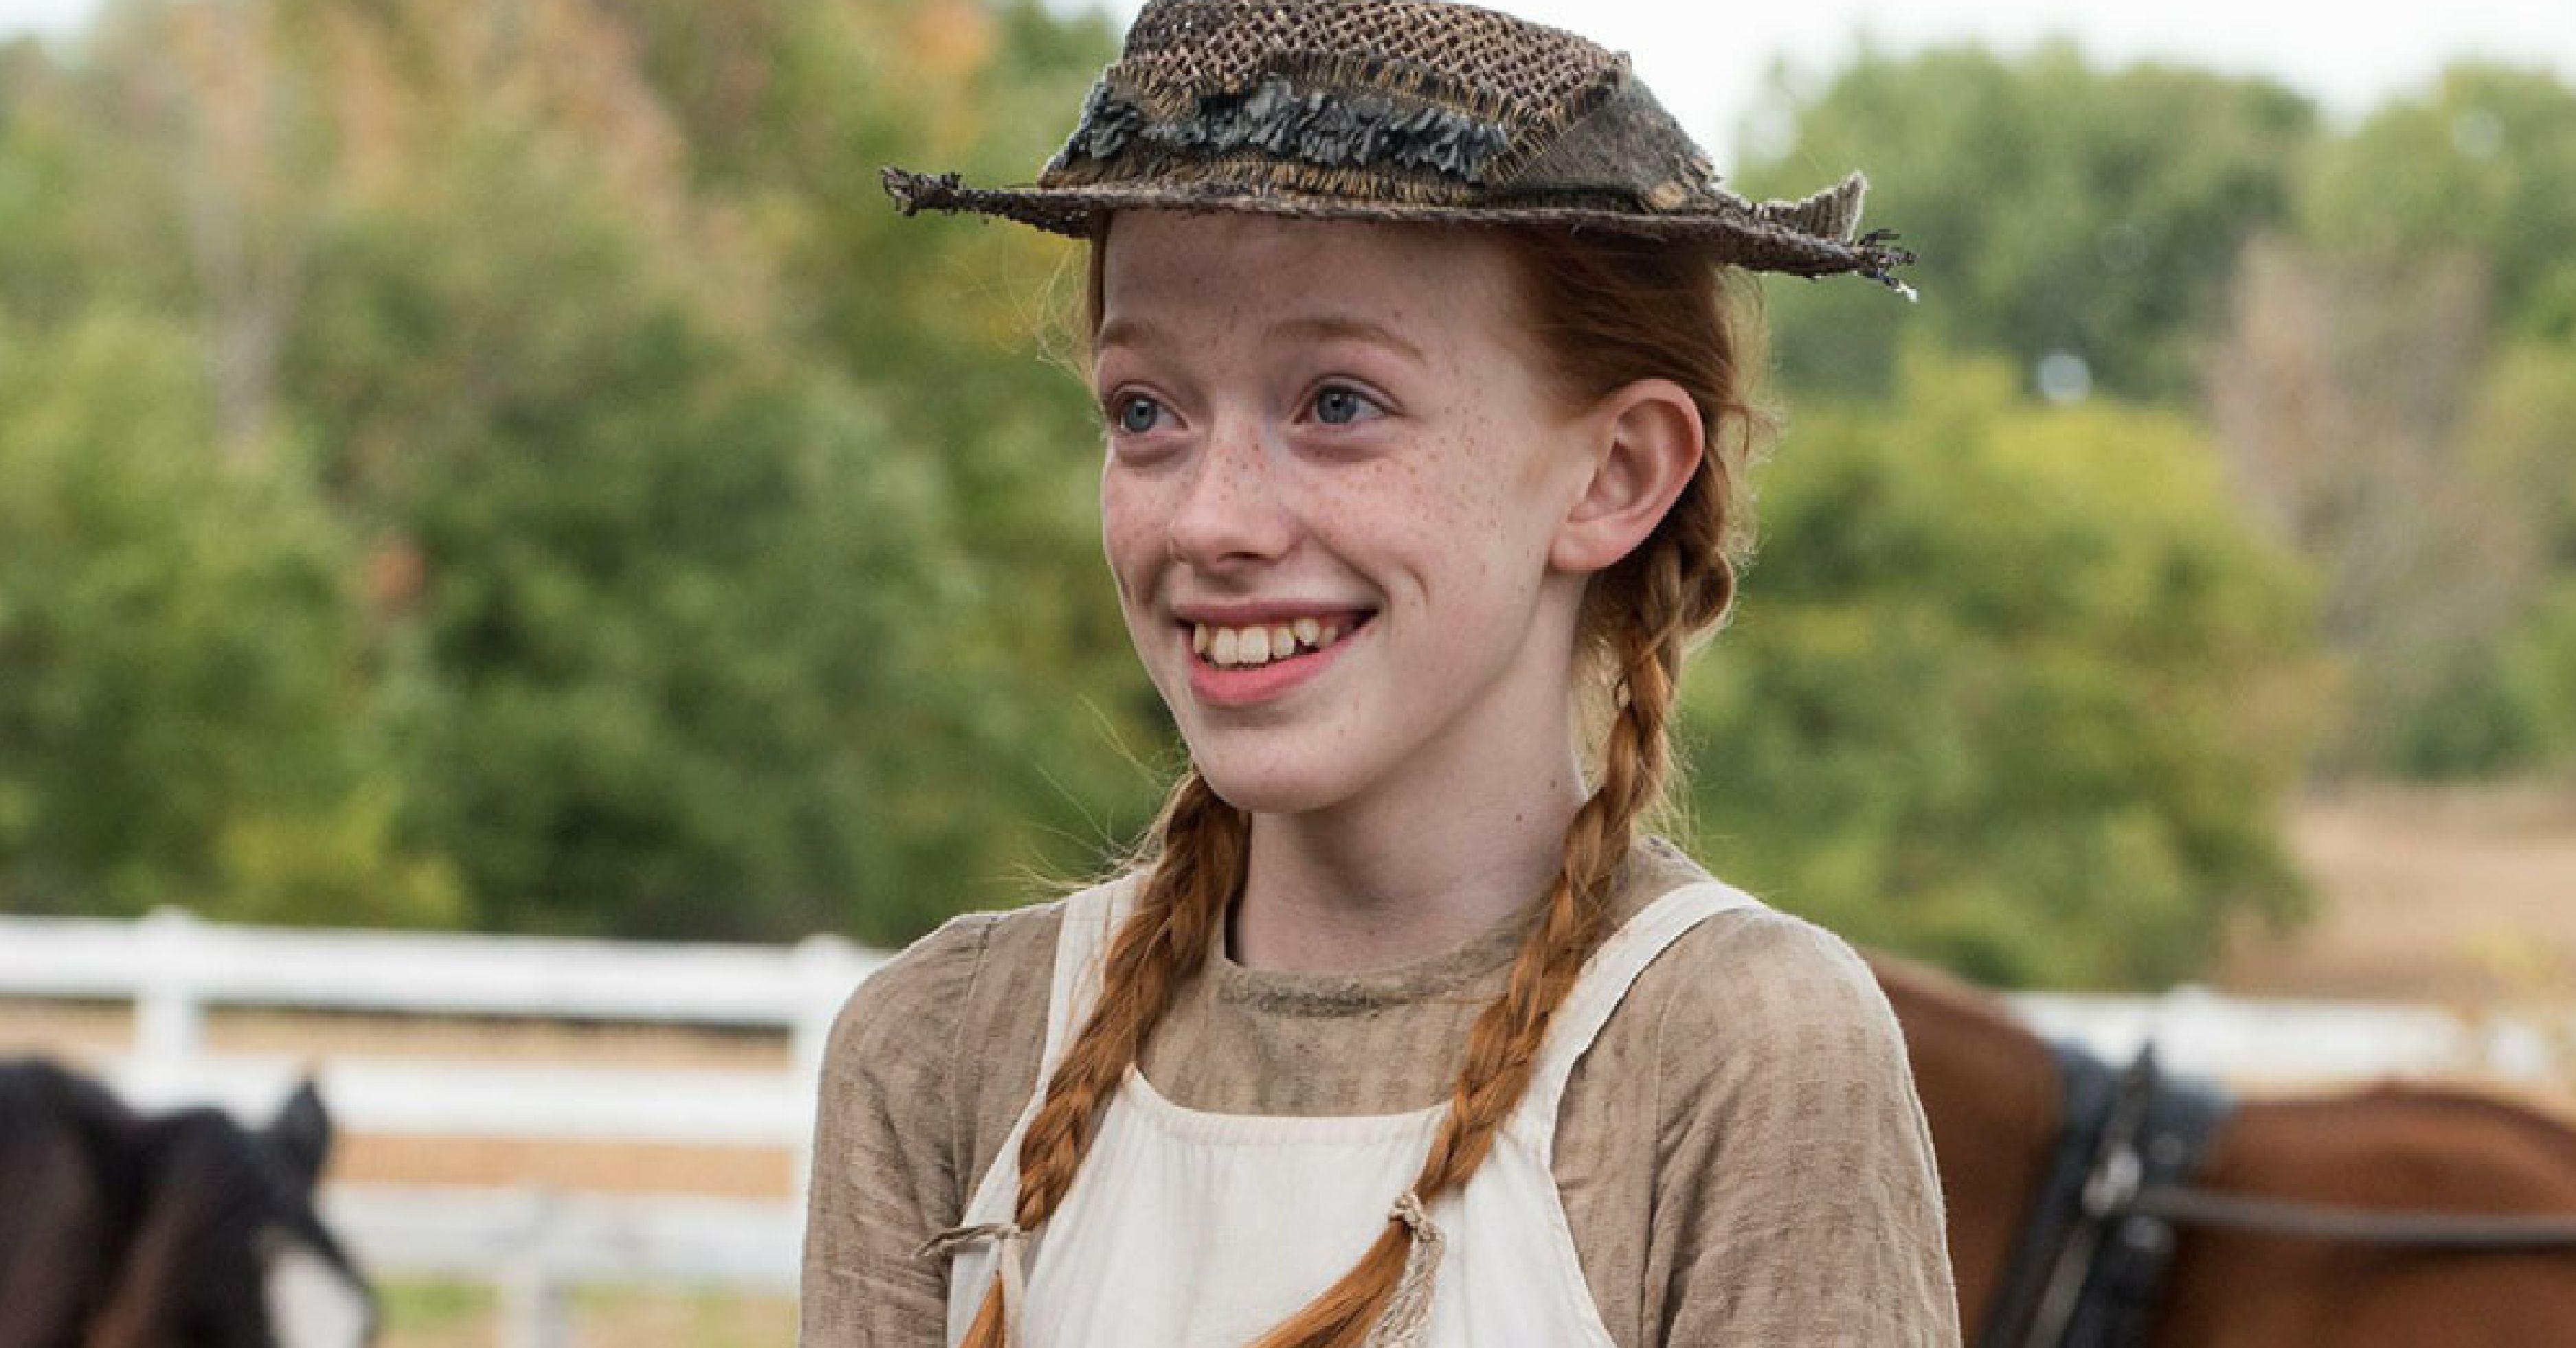 Let's Talk About Anne of Green Gables and Her Attention Deficit Disorder